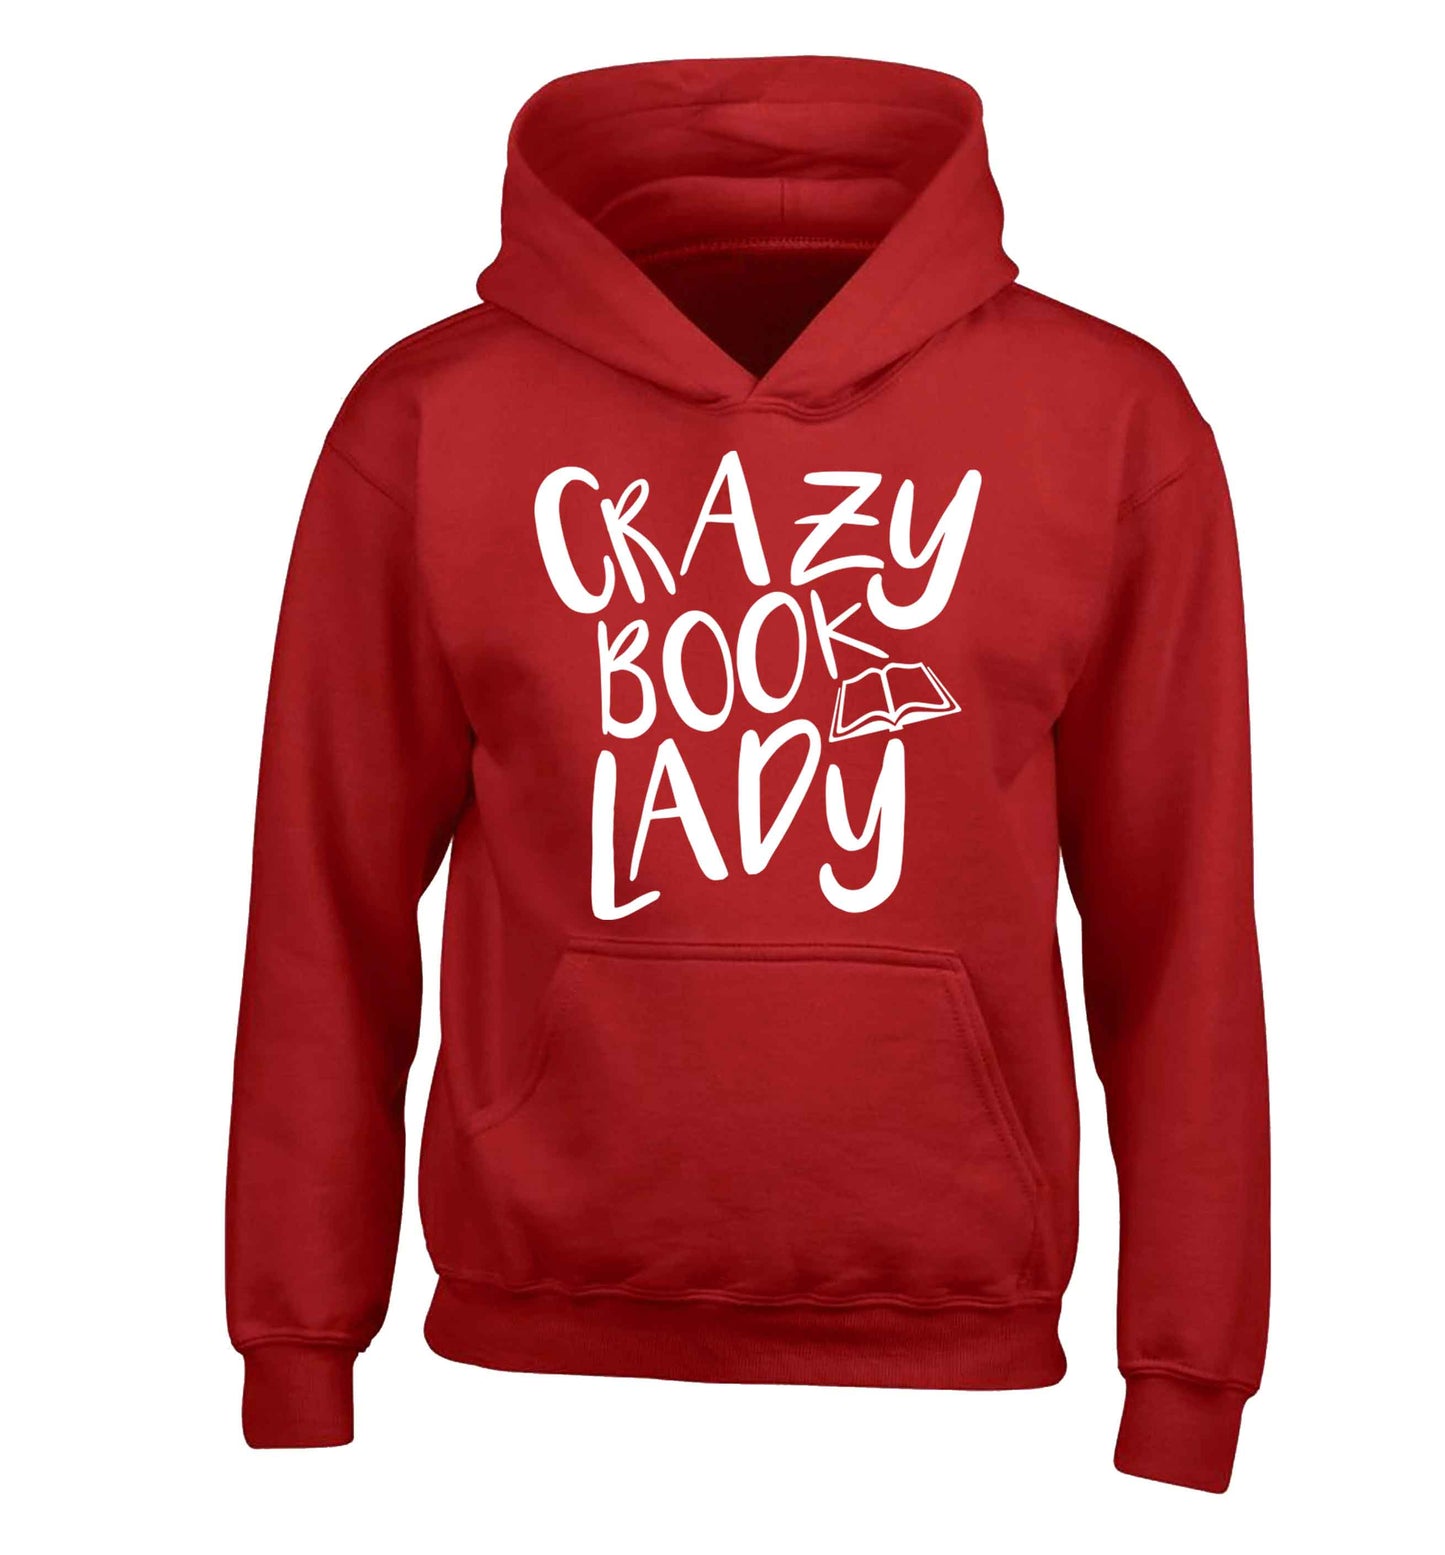 Crazy book lady children's red hoodie 12-13 Years